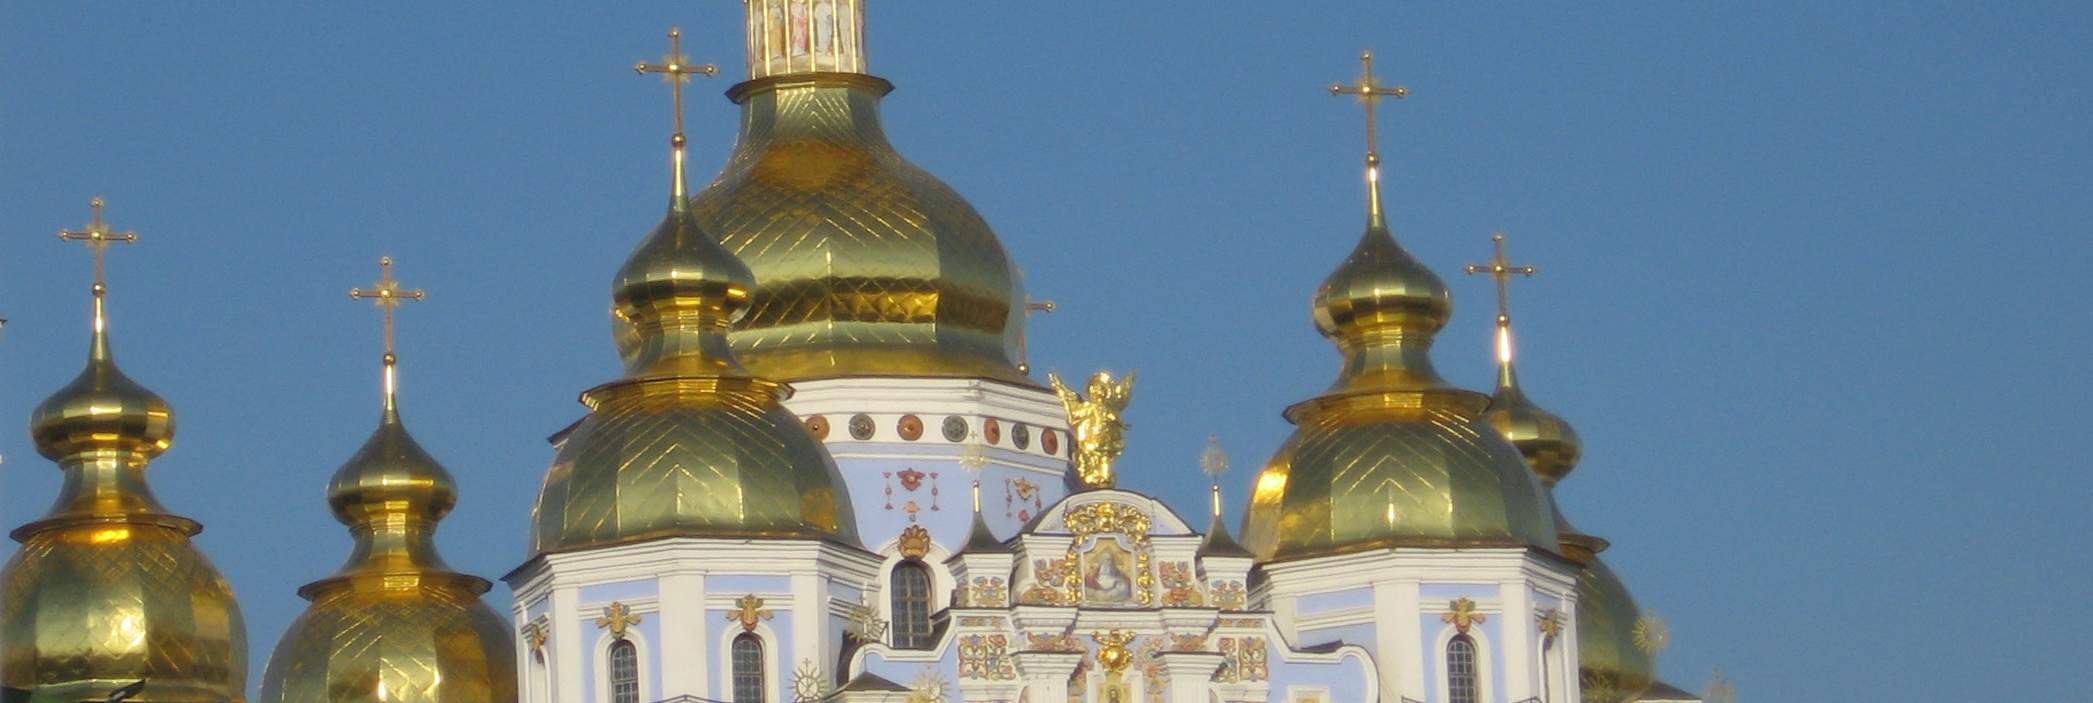 Sights to See in Ukraine - St Michaels Monastery